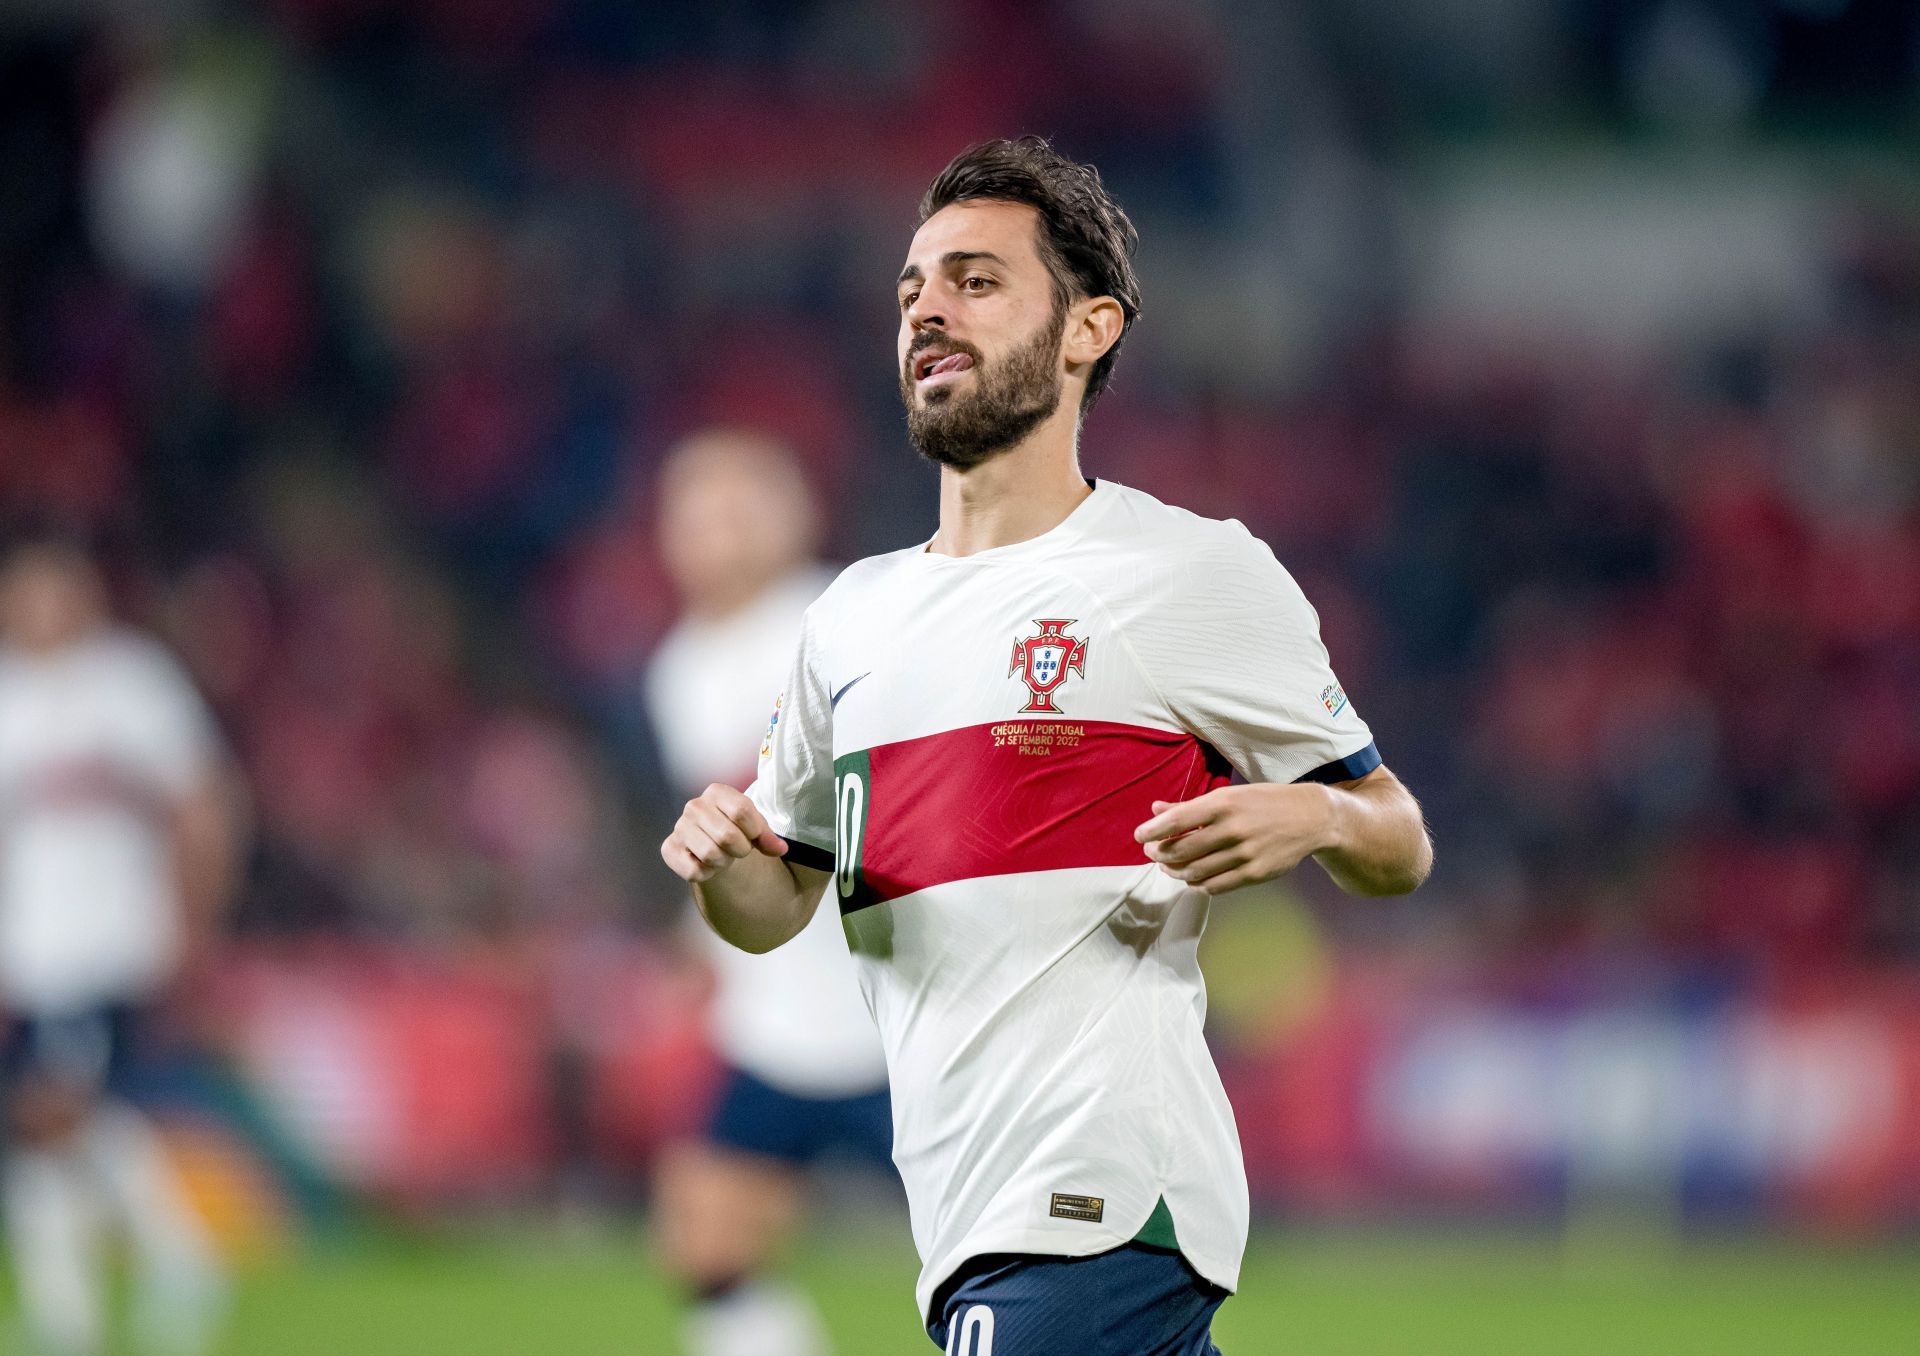 Silva wants to concentrate on the World Cup